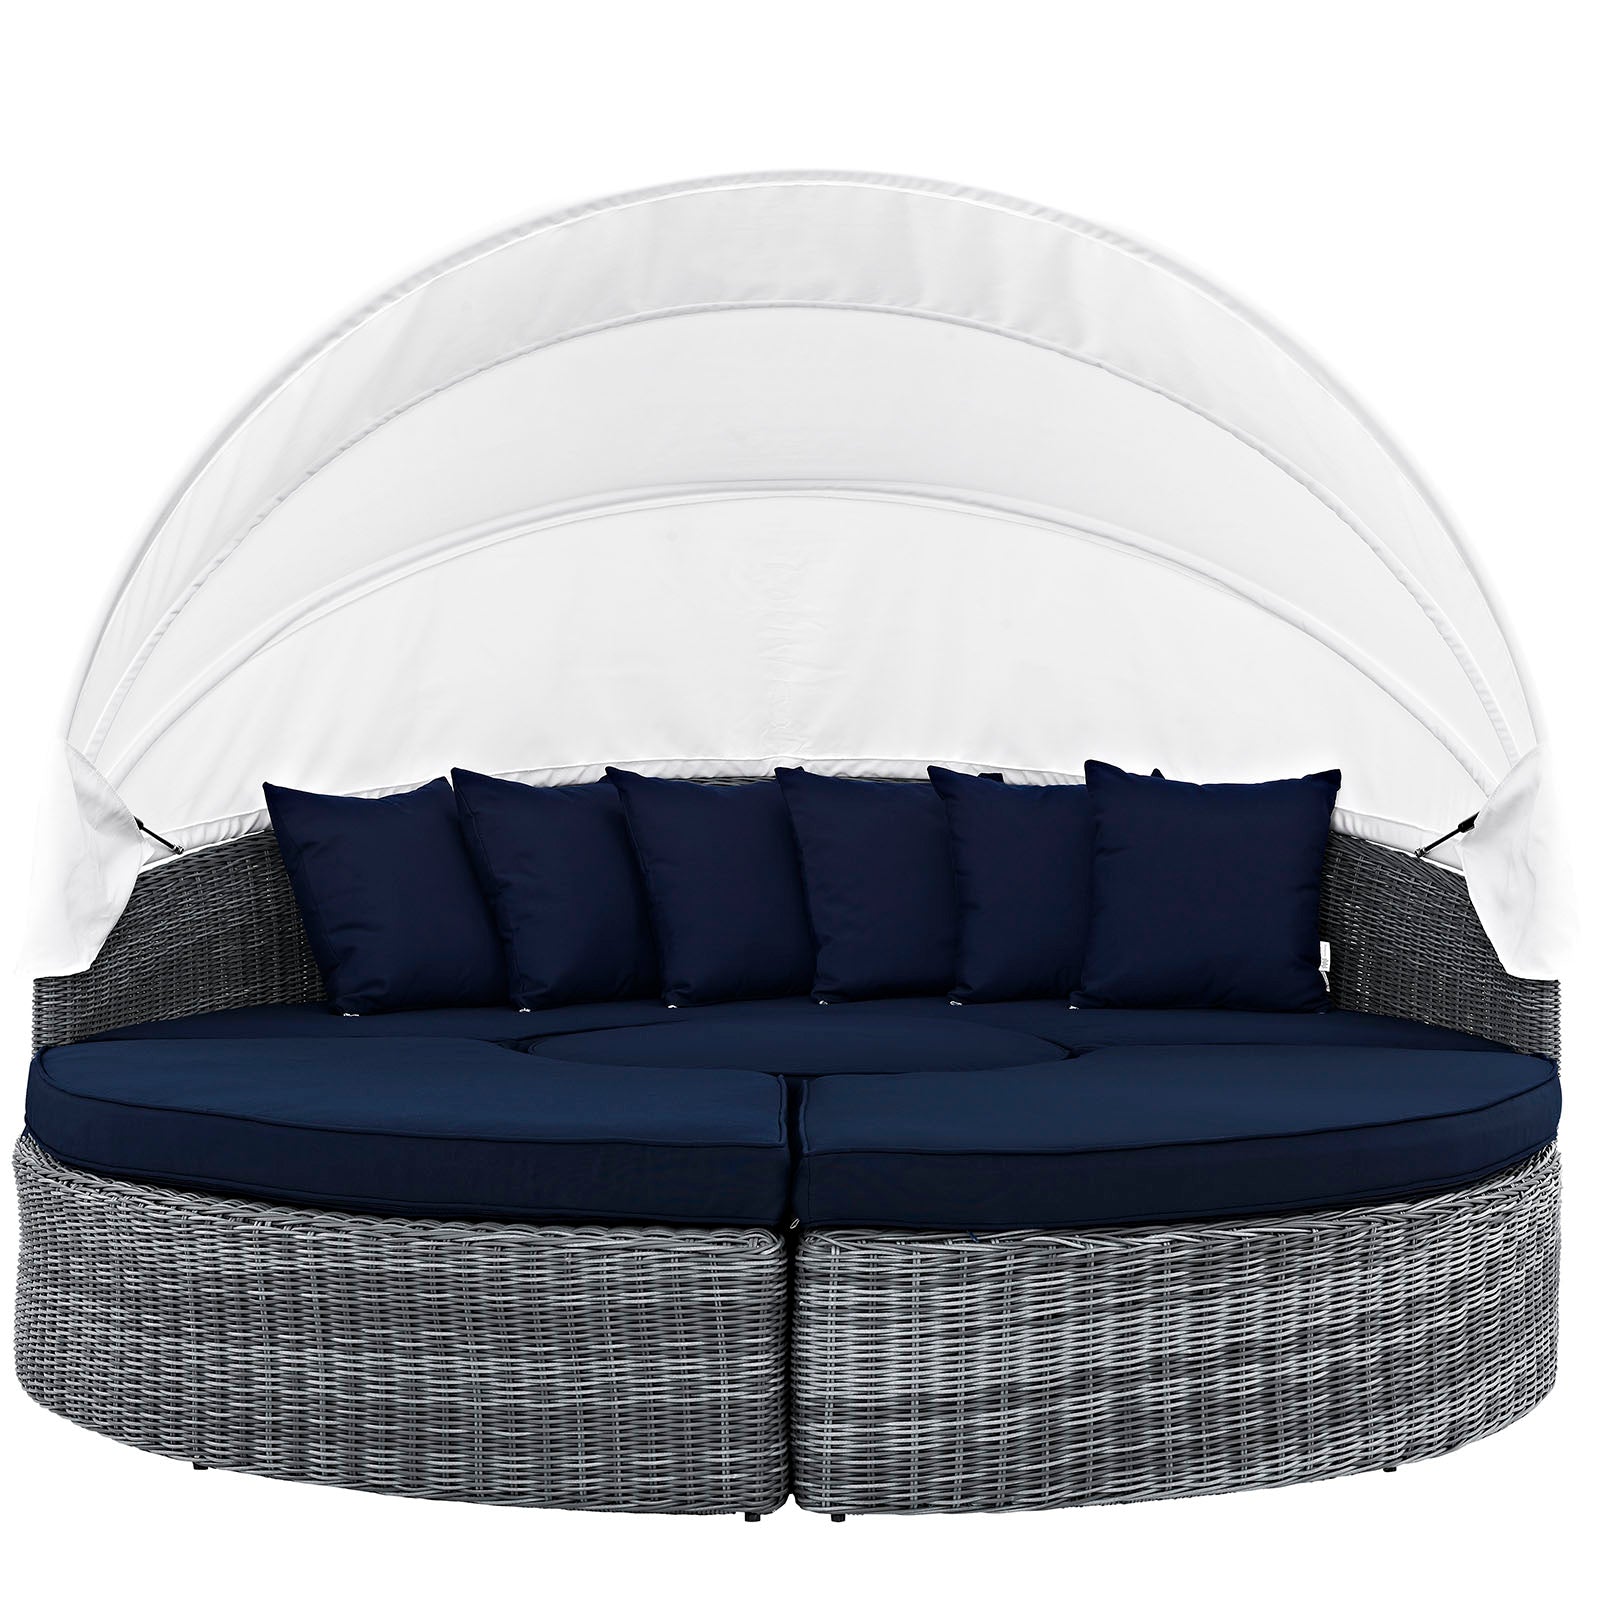 Modway Patio Daybeds - Summon Canopy Outdoor Patio Sunbrella Daybed Canvas Navy